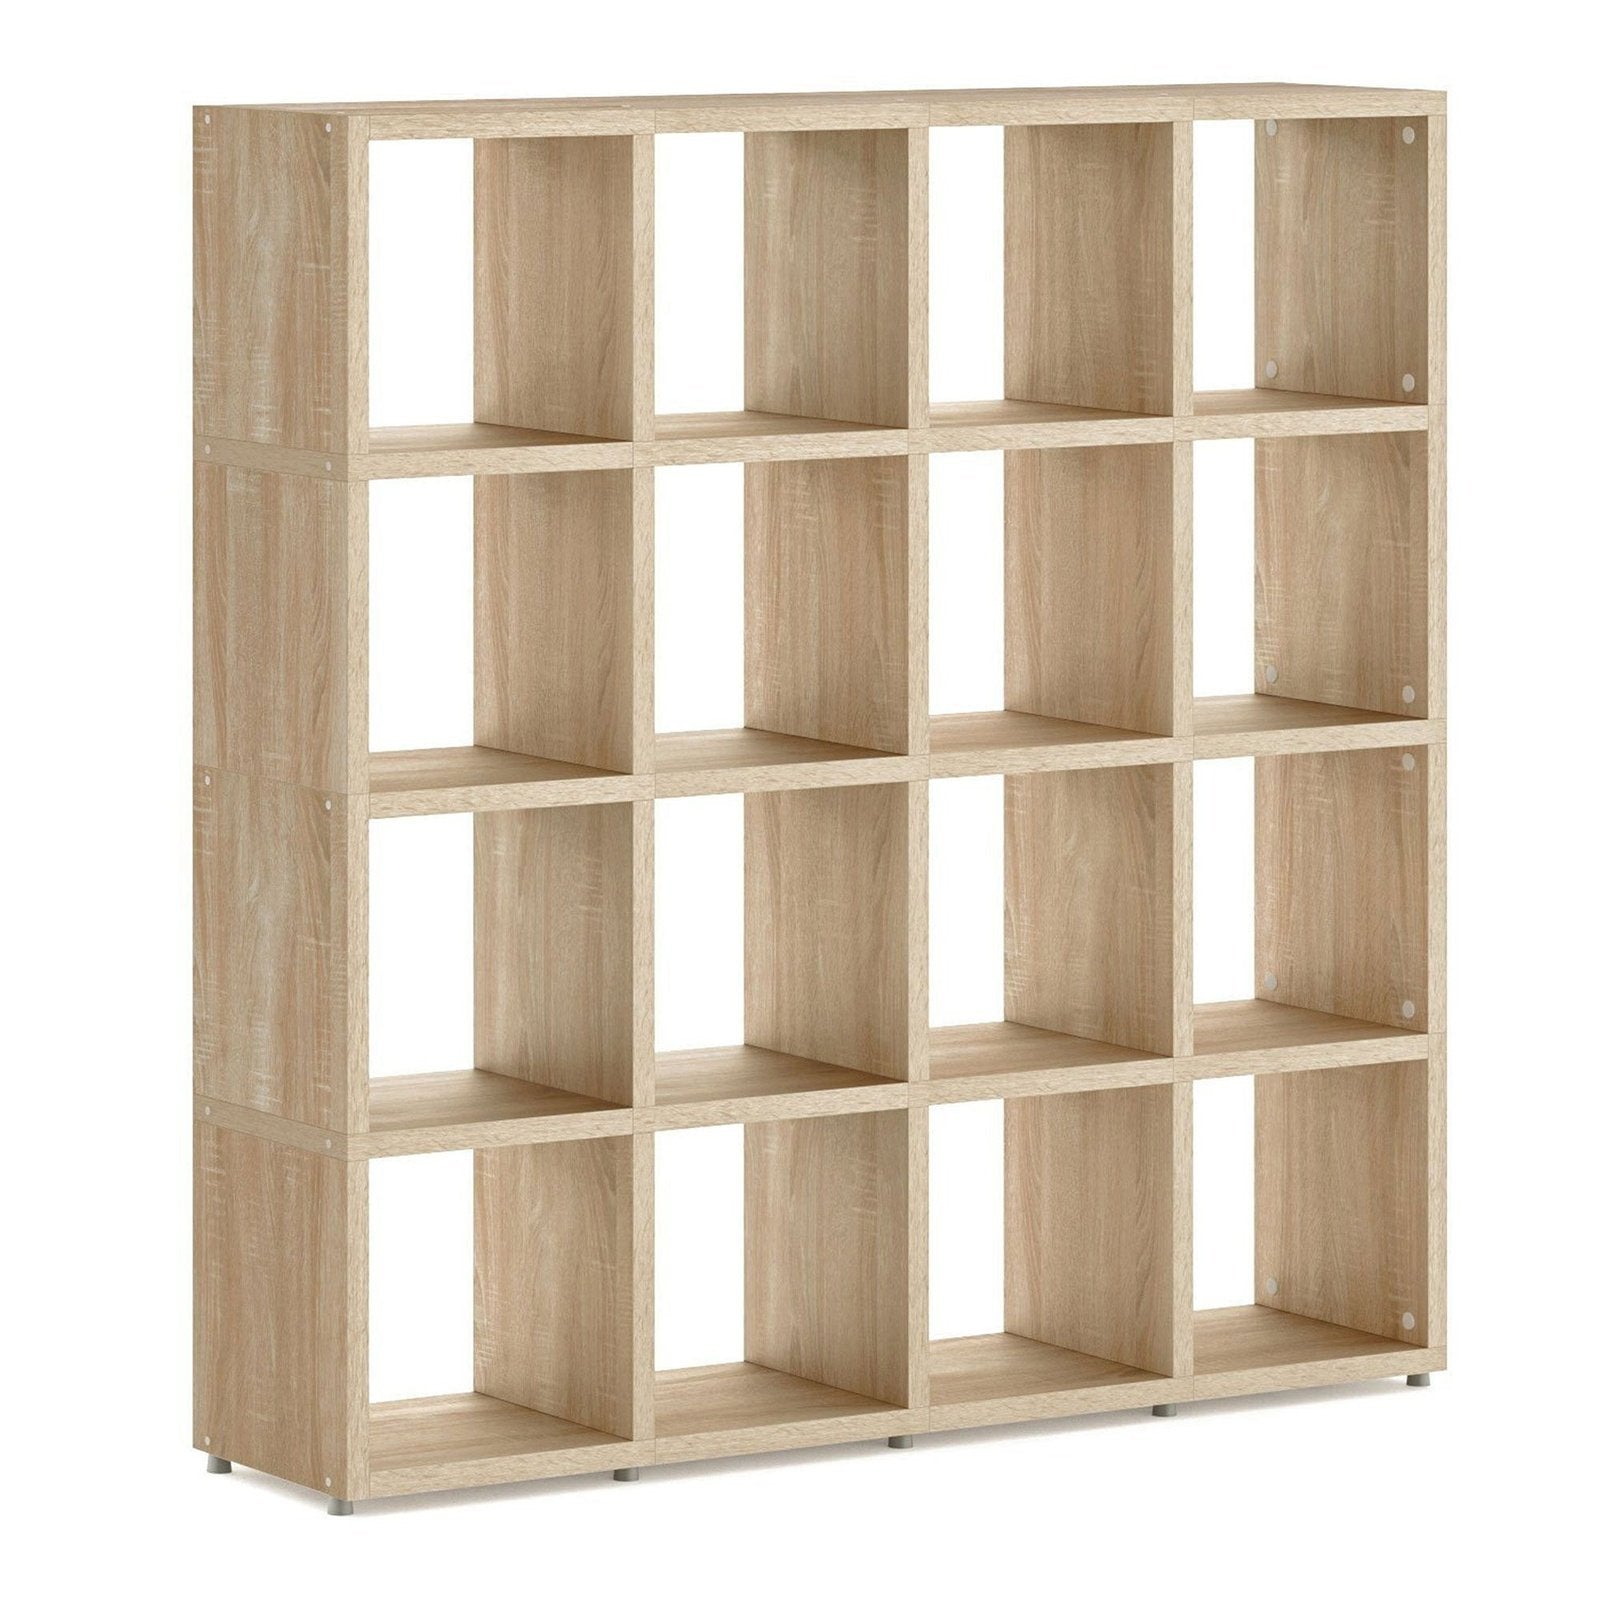 Boon 16x Cube Shelf Storage System - 1470x1450x330mm - Office Products Online